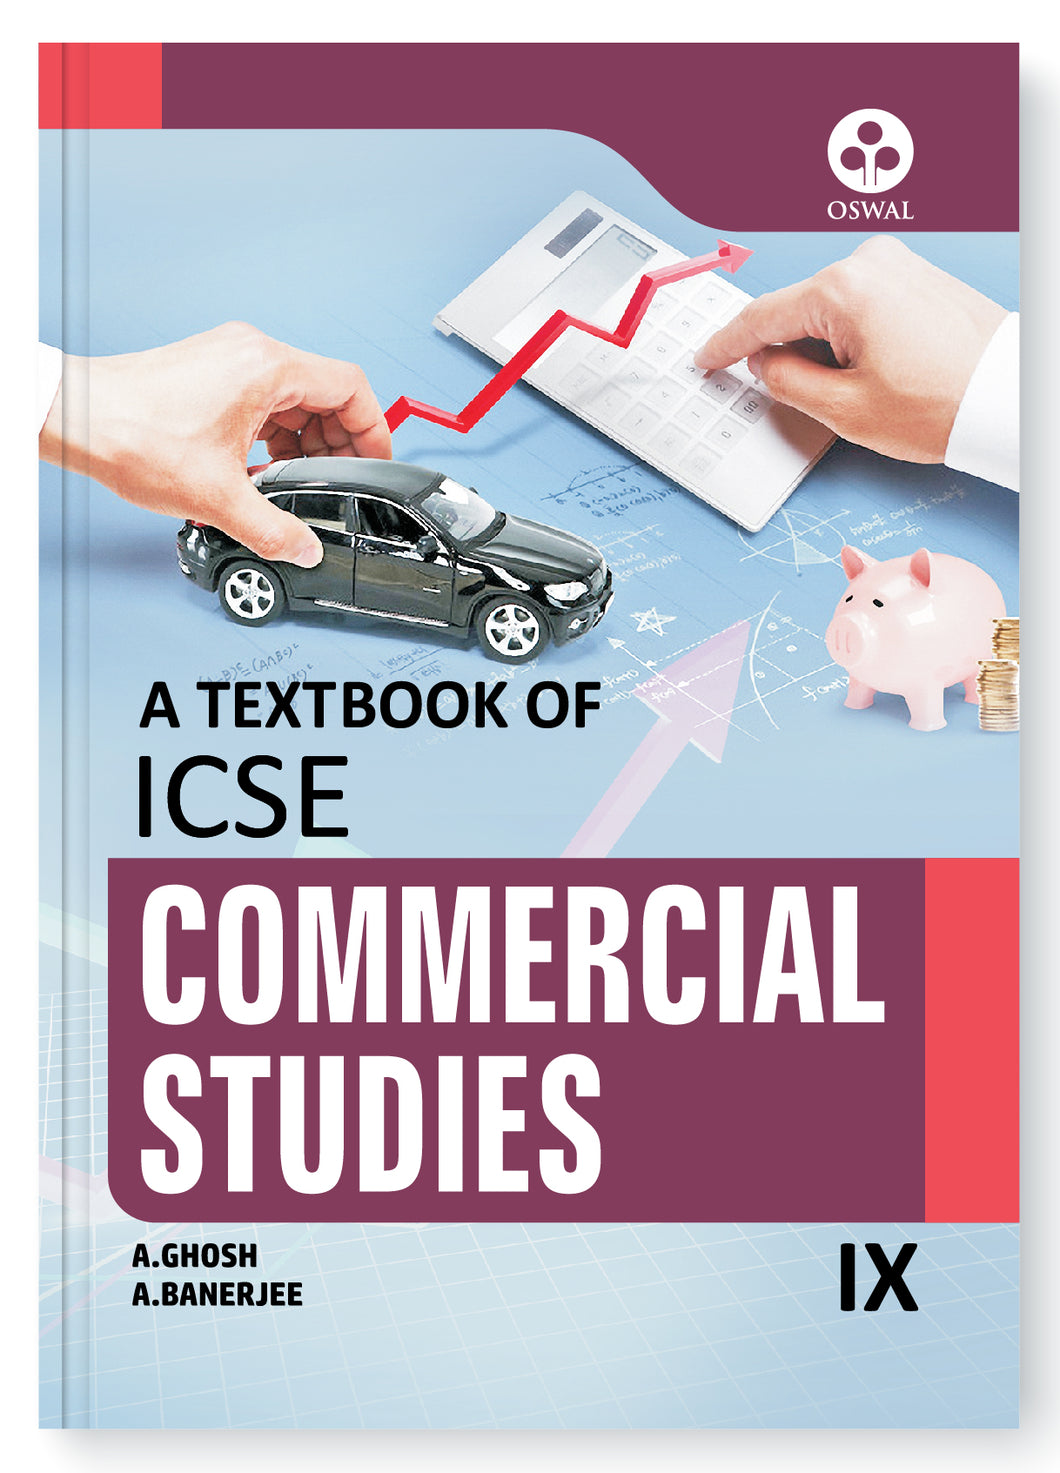 Oswal Commercial Studies Textbook for ICSE Class 9 : By A. Ghosh, A. Banerjee, Latest Edition 2023-24